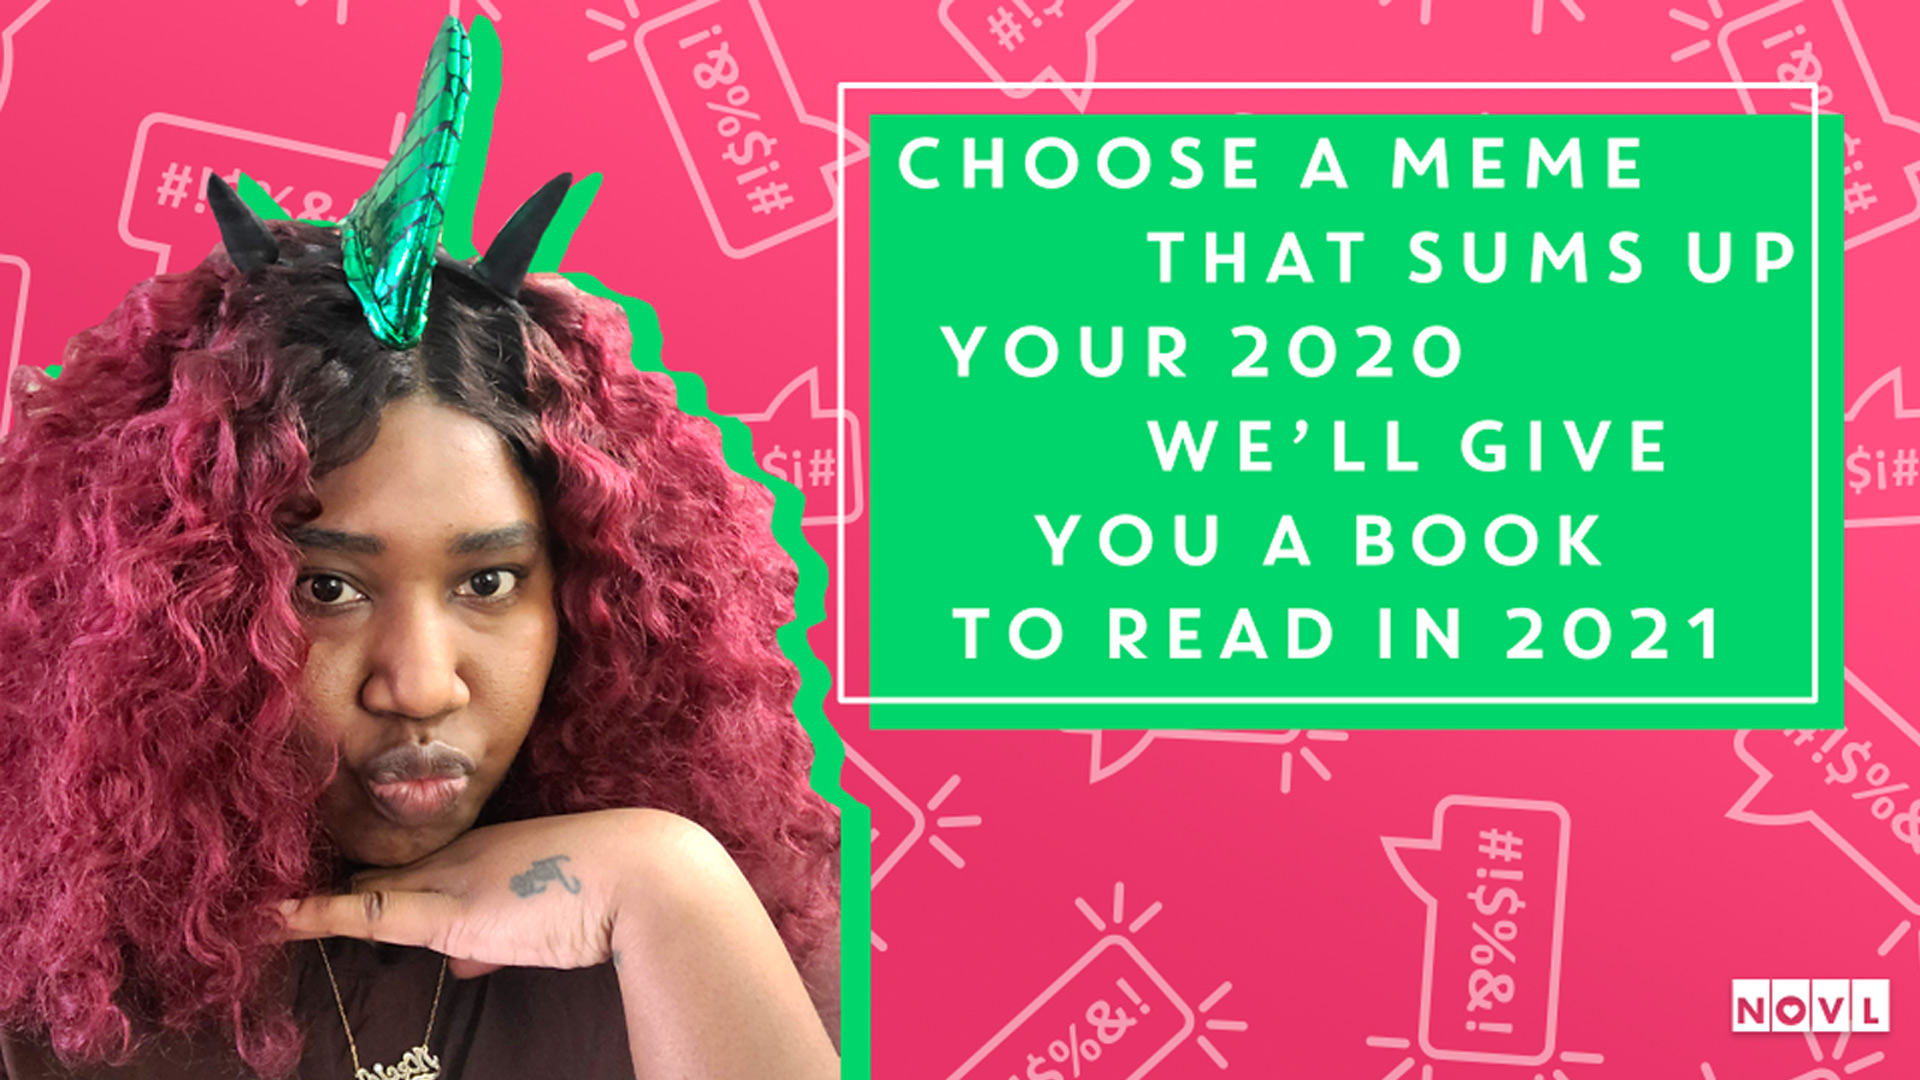 The NOVL Blog, Featured Image for Article: Pick a meme that sums up your 2020, we'll give you a book to read in 2021